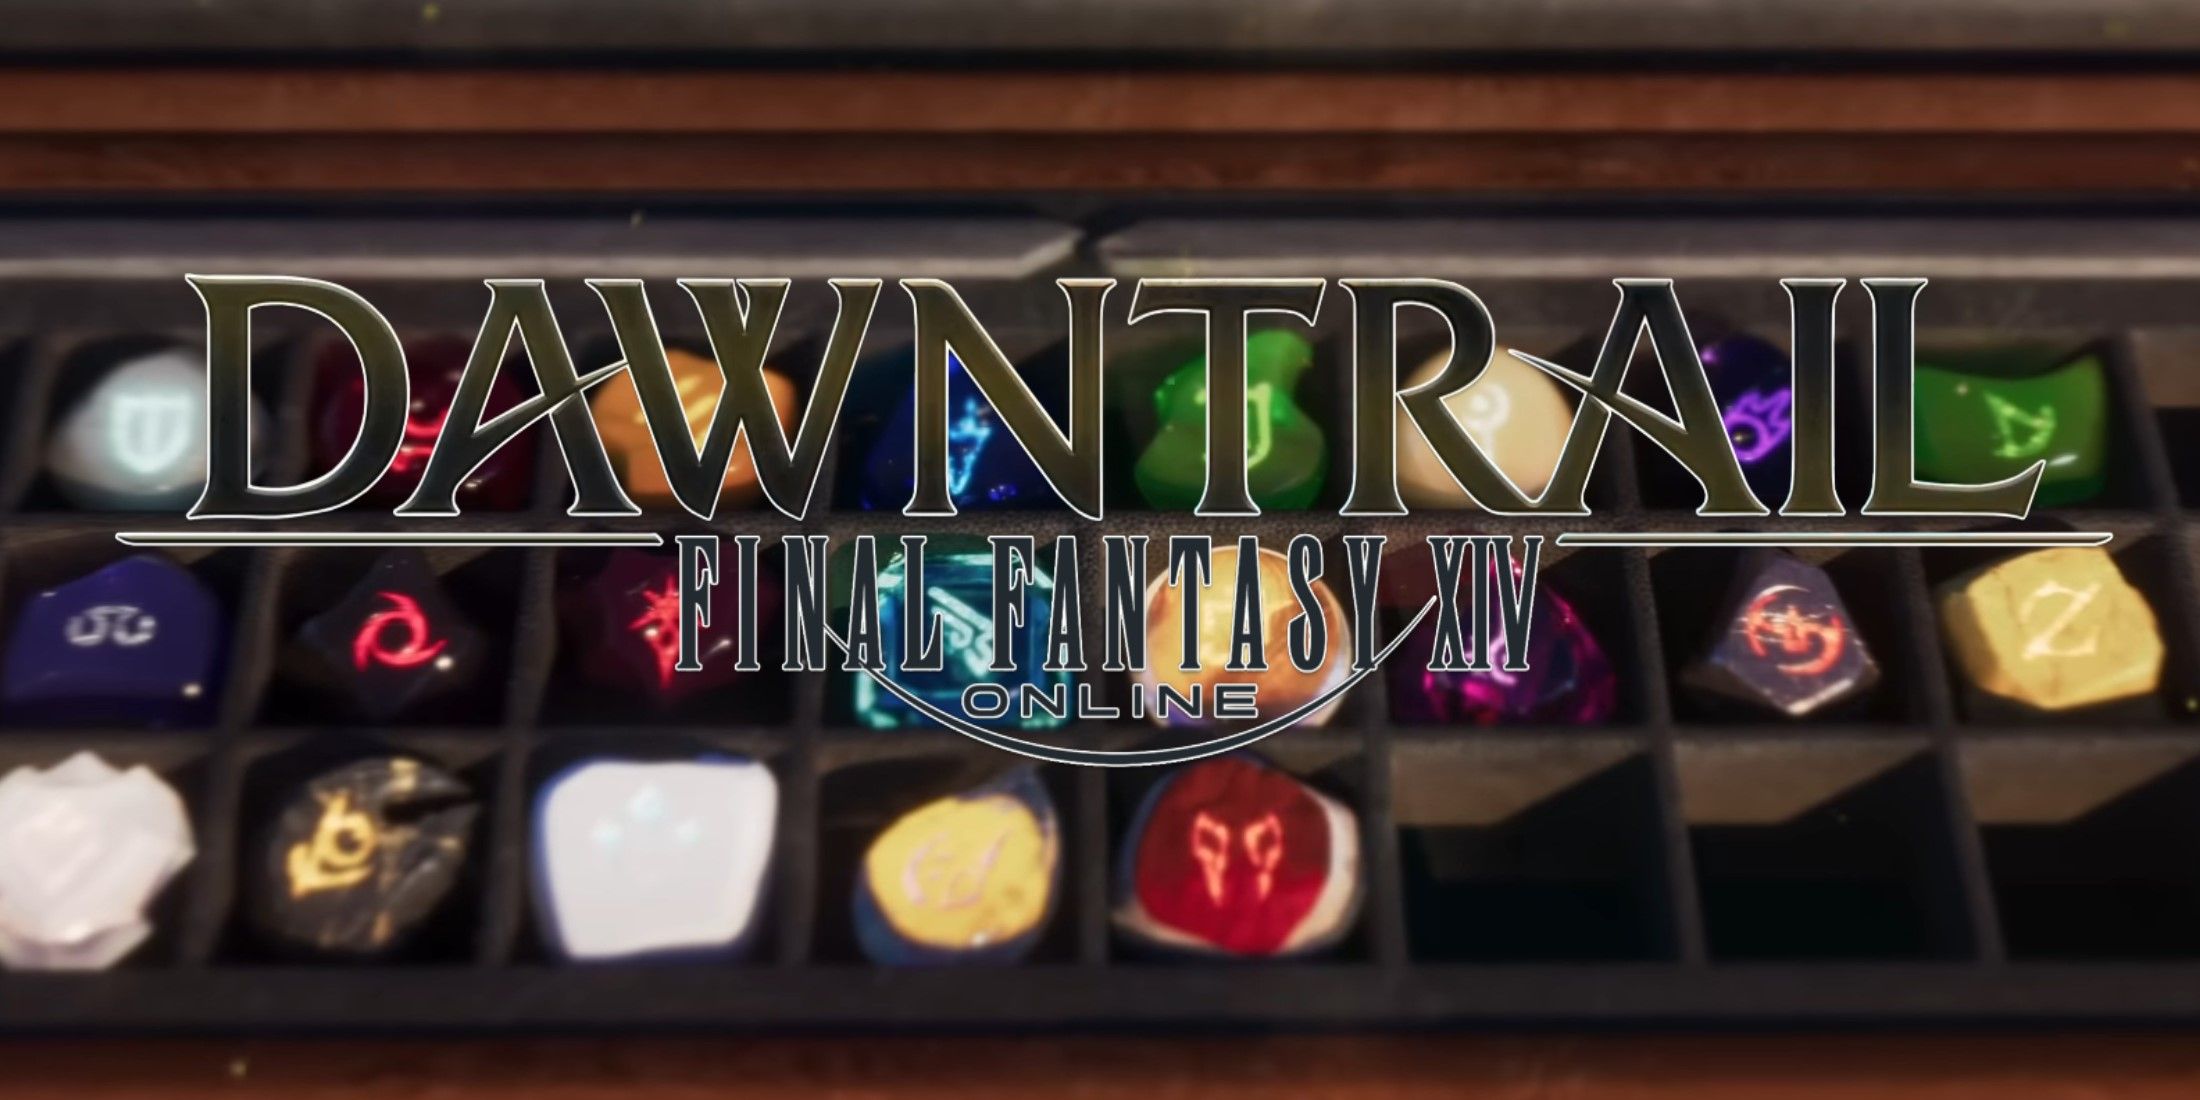 The Final Fantasy 14: Dawntrail Logo with a chest of Job Soul Crystals in the background.